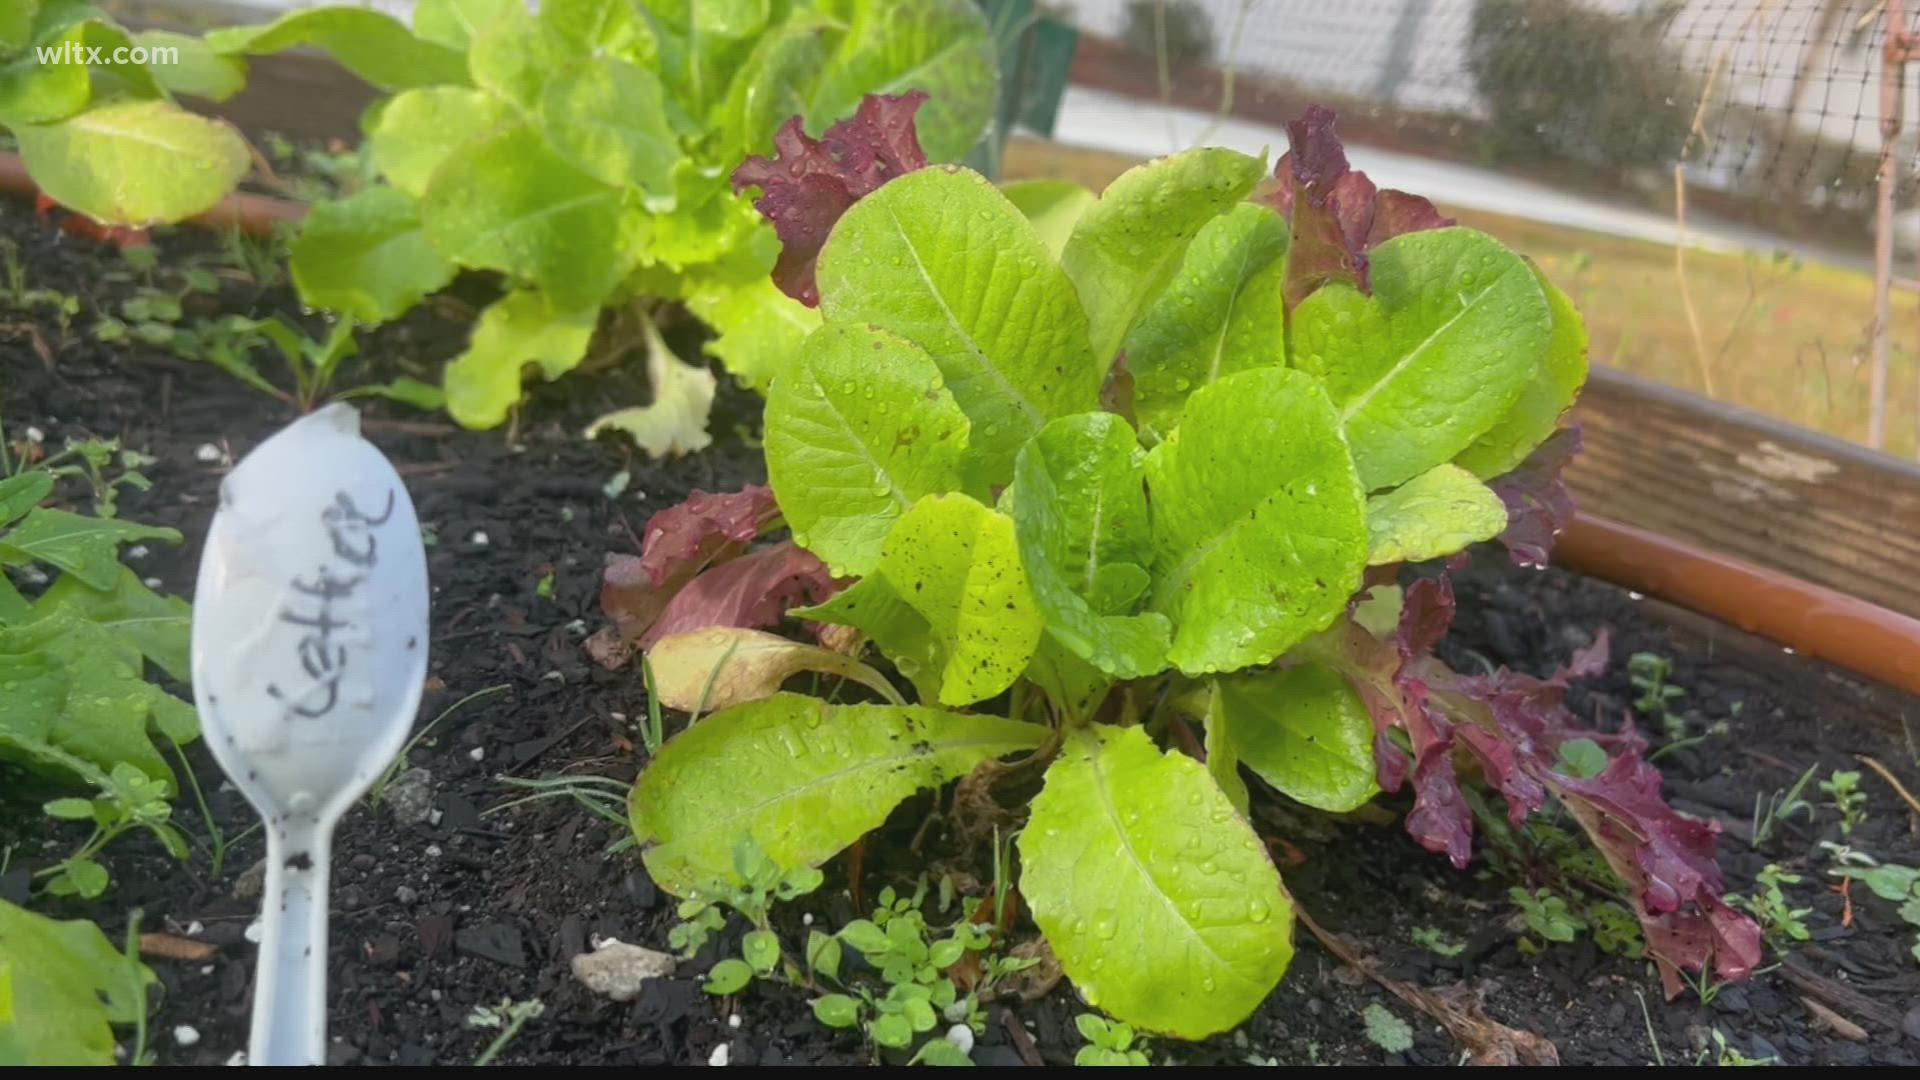 Winter plants are thriving in Gandy's Garden outside WLTX. Meteorologist Alex Calamia shares a few low maintenance winter vegetables for South Carolina gardeners.